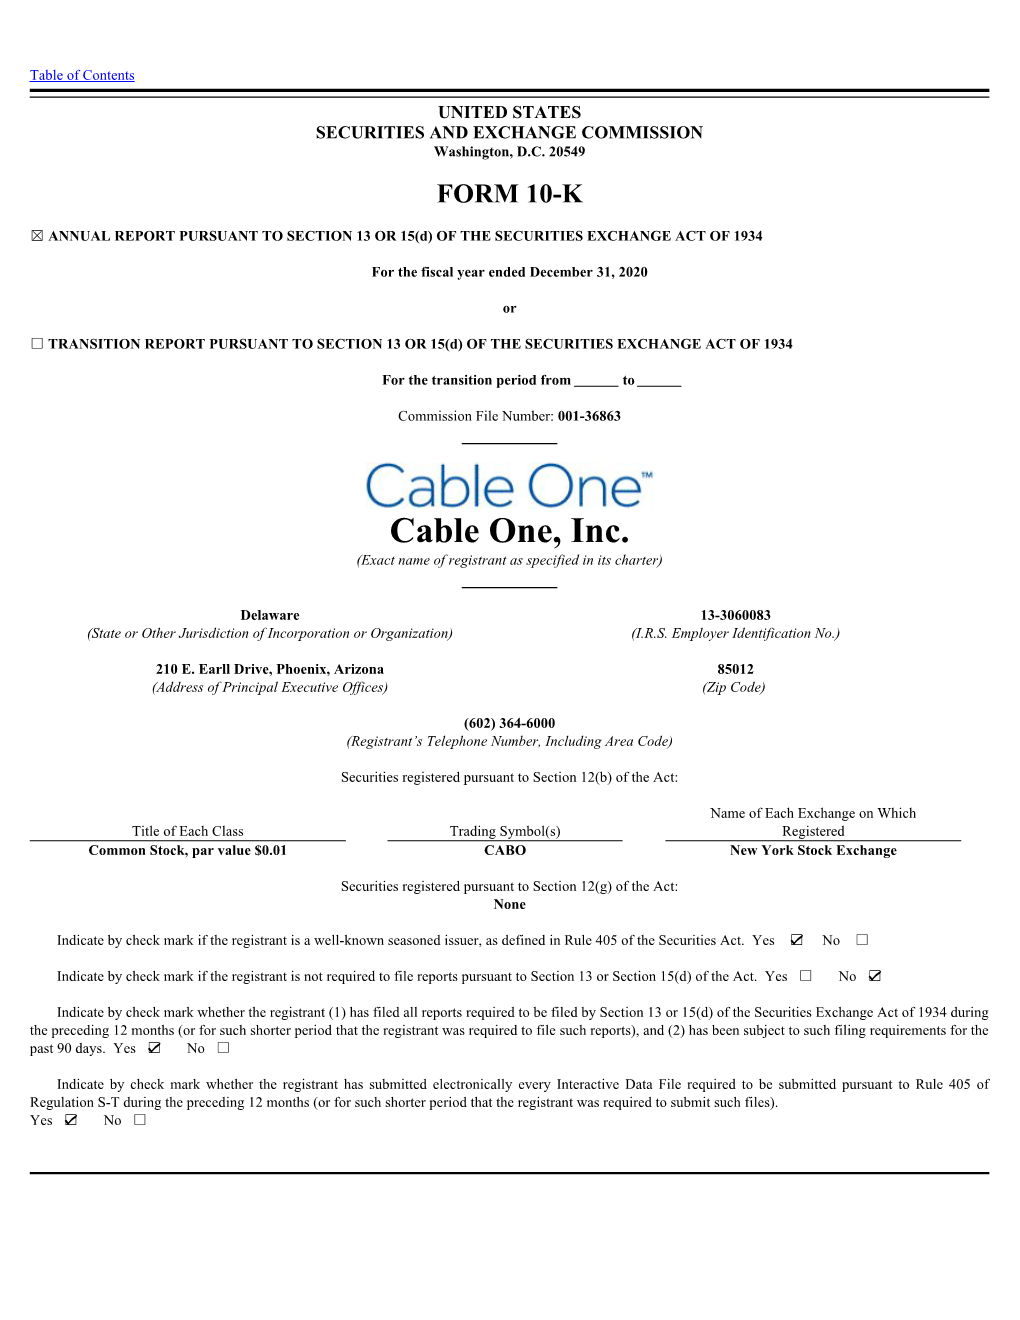 Cable One, Inc. (Exact Name of Registrant As Specified in Its Charter)